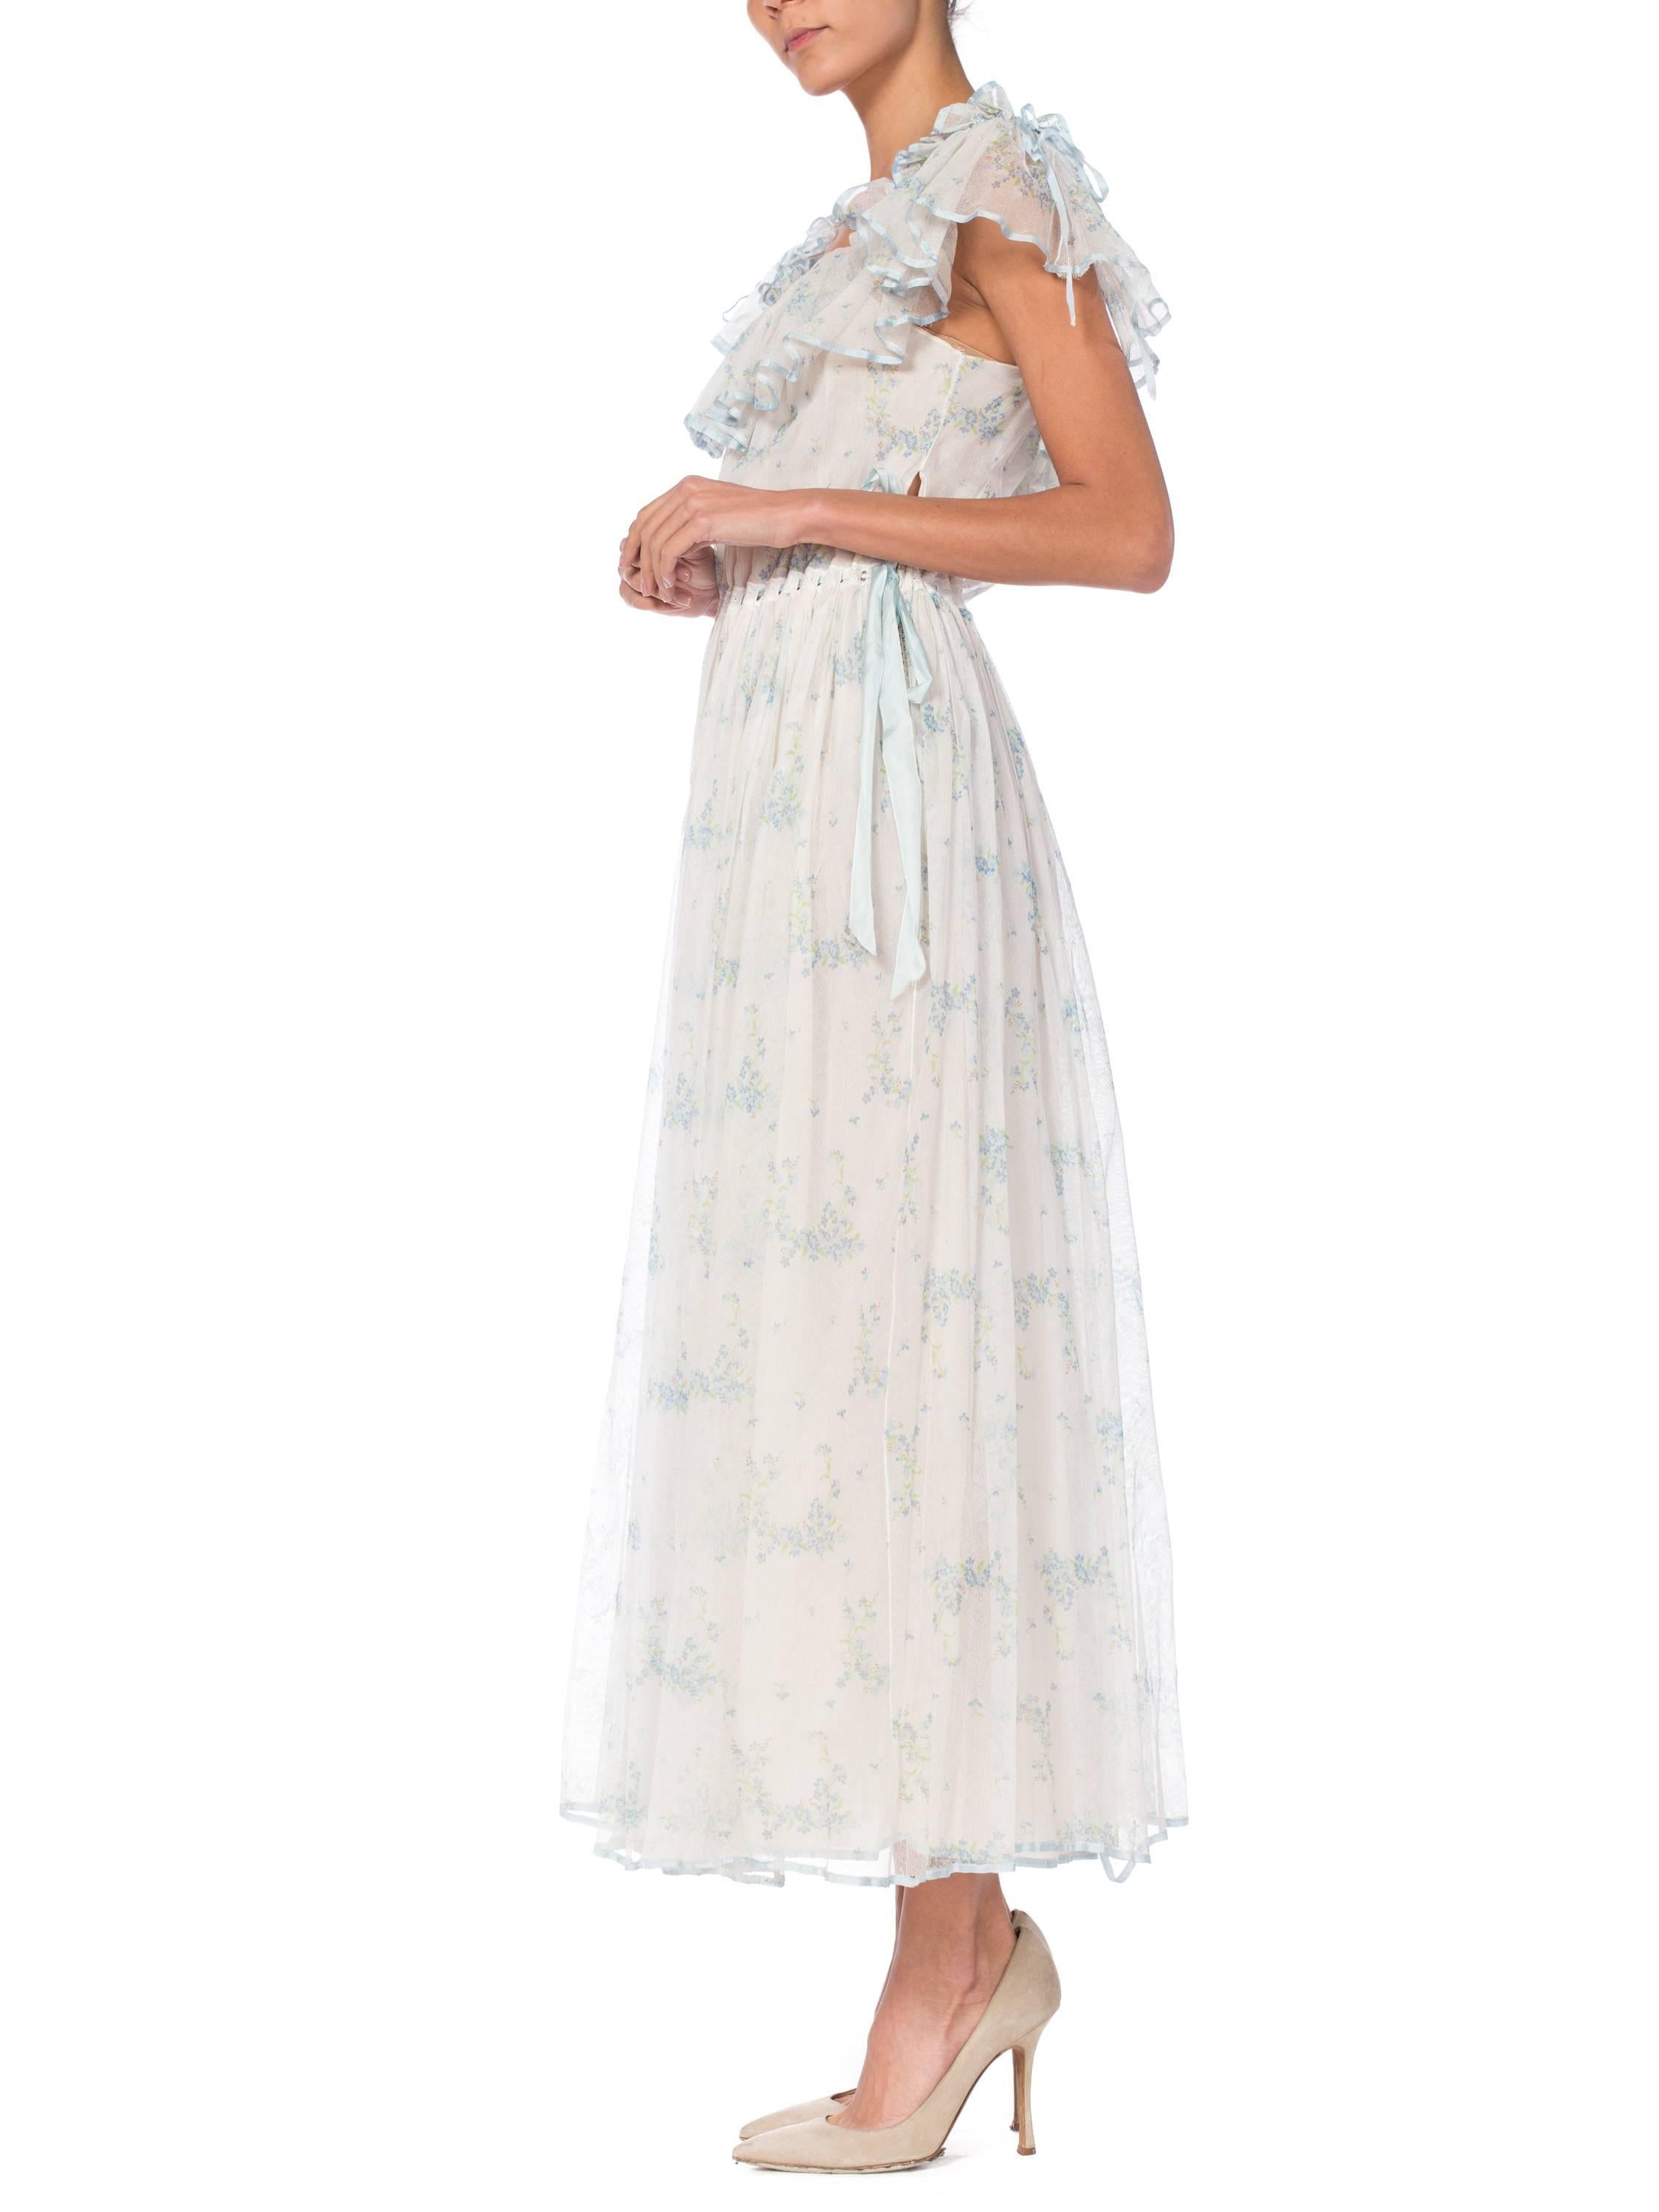 1970S Pale Blue Floral Printed Cotton Tulle Ruffled Maxi Dress Lined In Silk For Sale 2